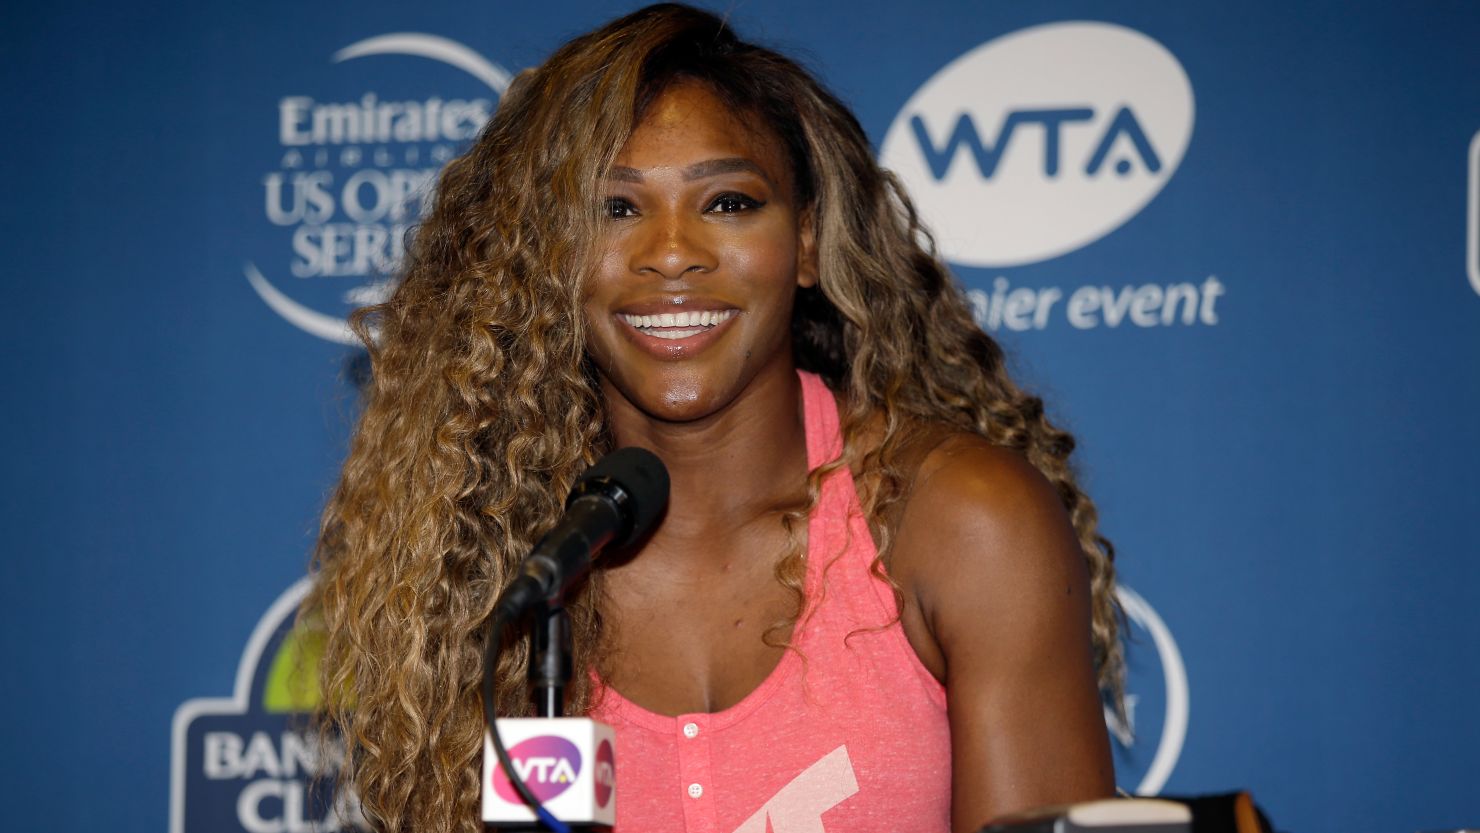 Serena Williams is starting her preparations to capture a third straight U.S. open title in New York in August.